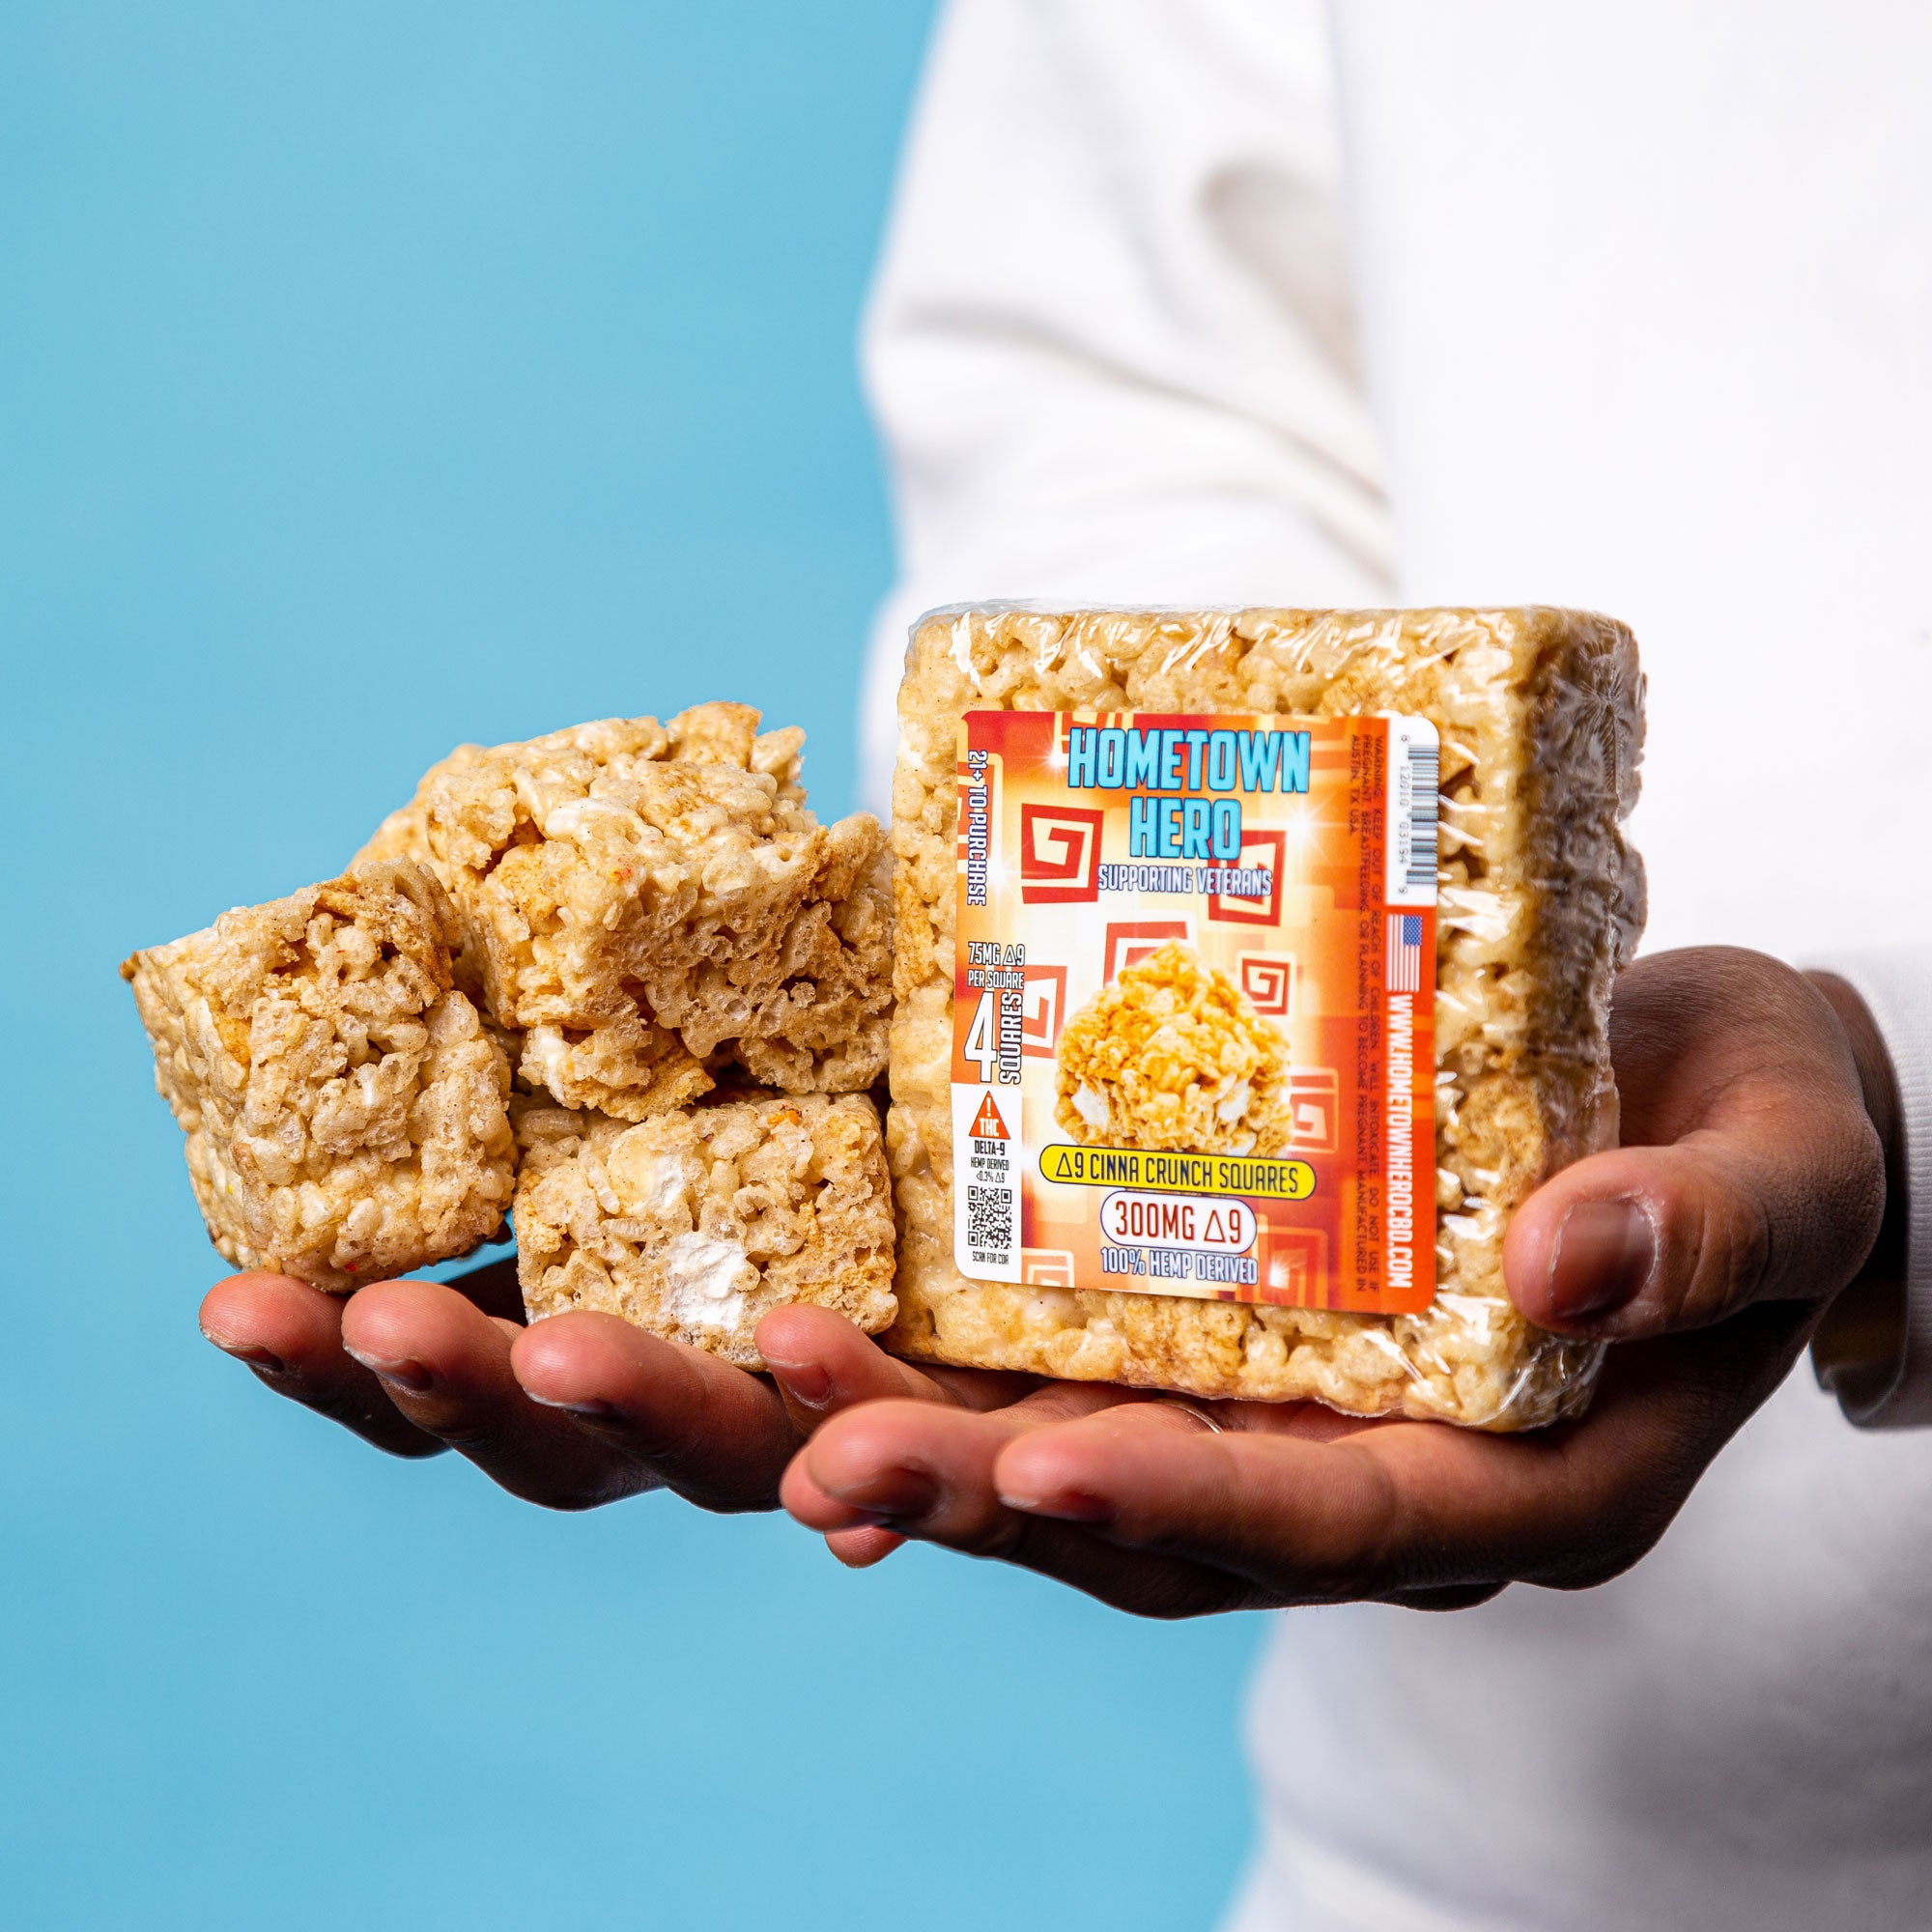 Buy 4 Get 1 FREE Delta 9 Cinna Crunch Squares with model (King) holding